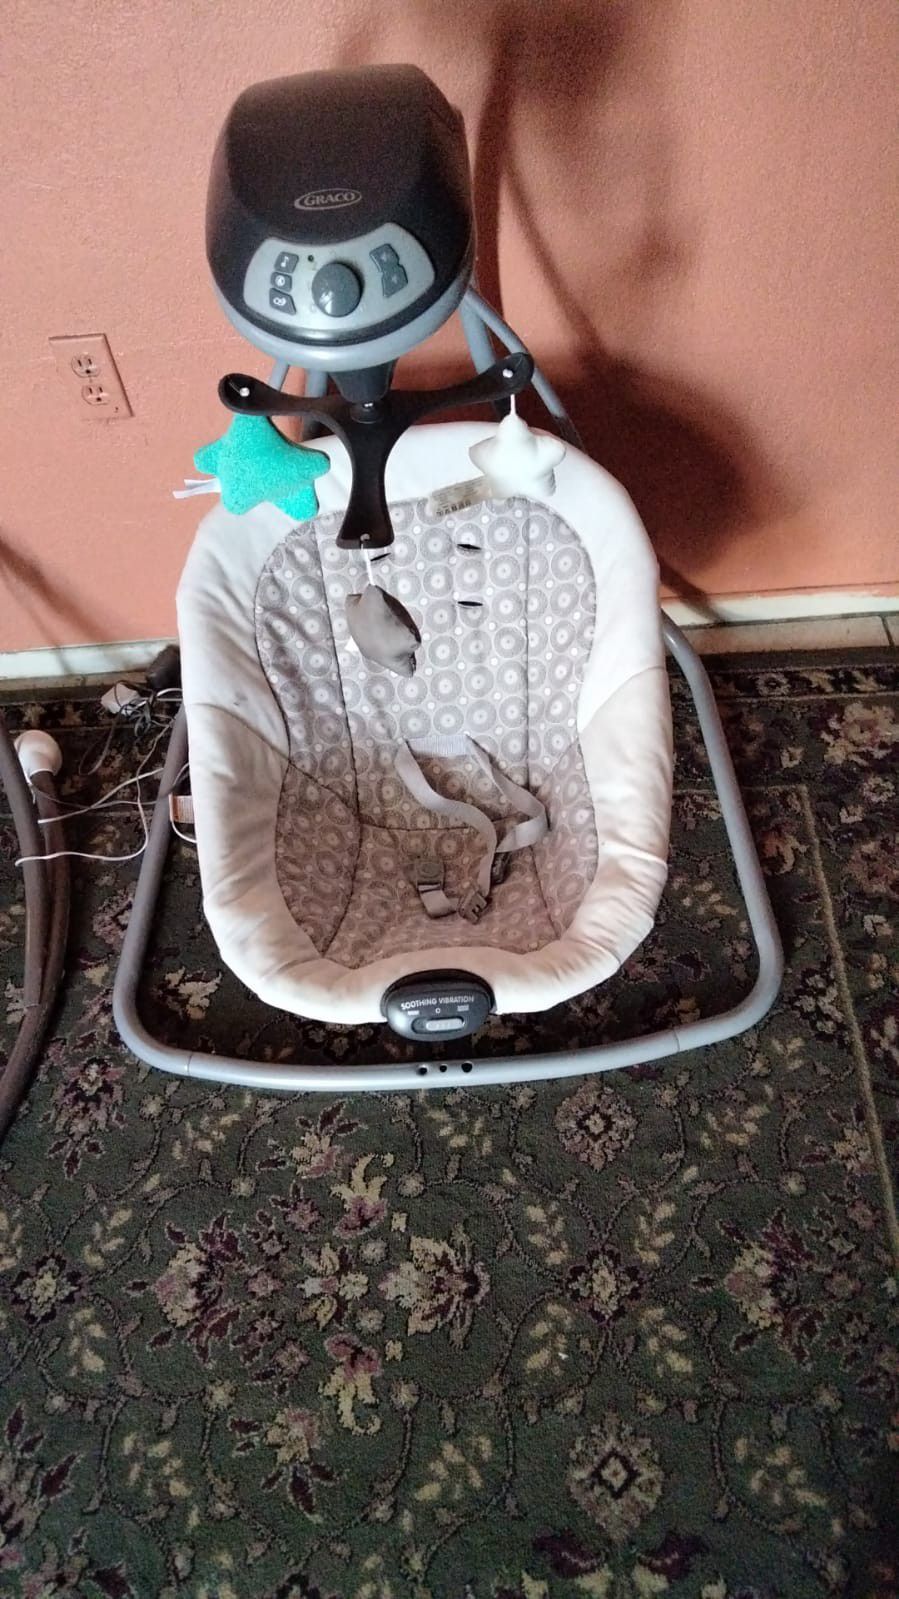 GRACO Baby Swing in An Excellent Condition. PET/ SMOKE FREE HOME. GENTLY USED